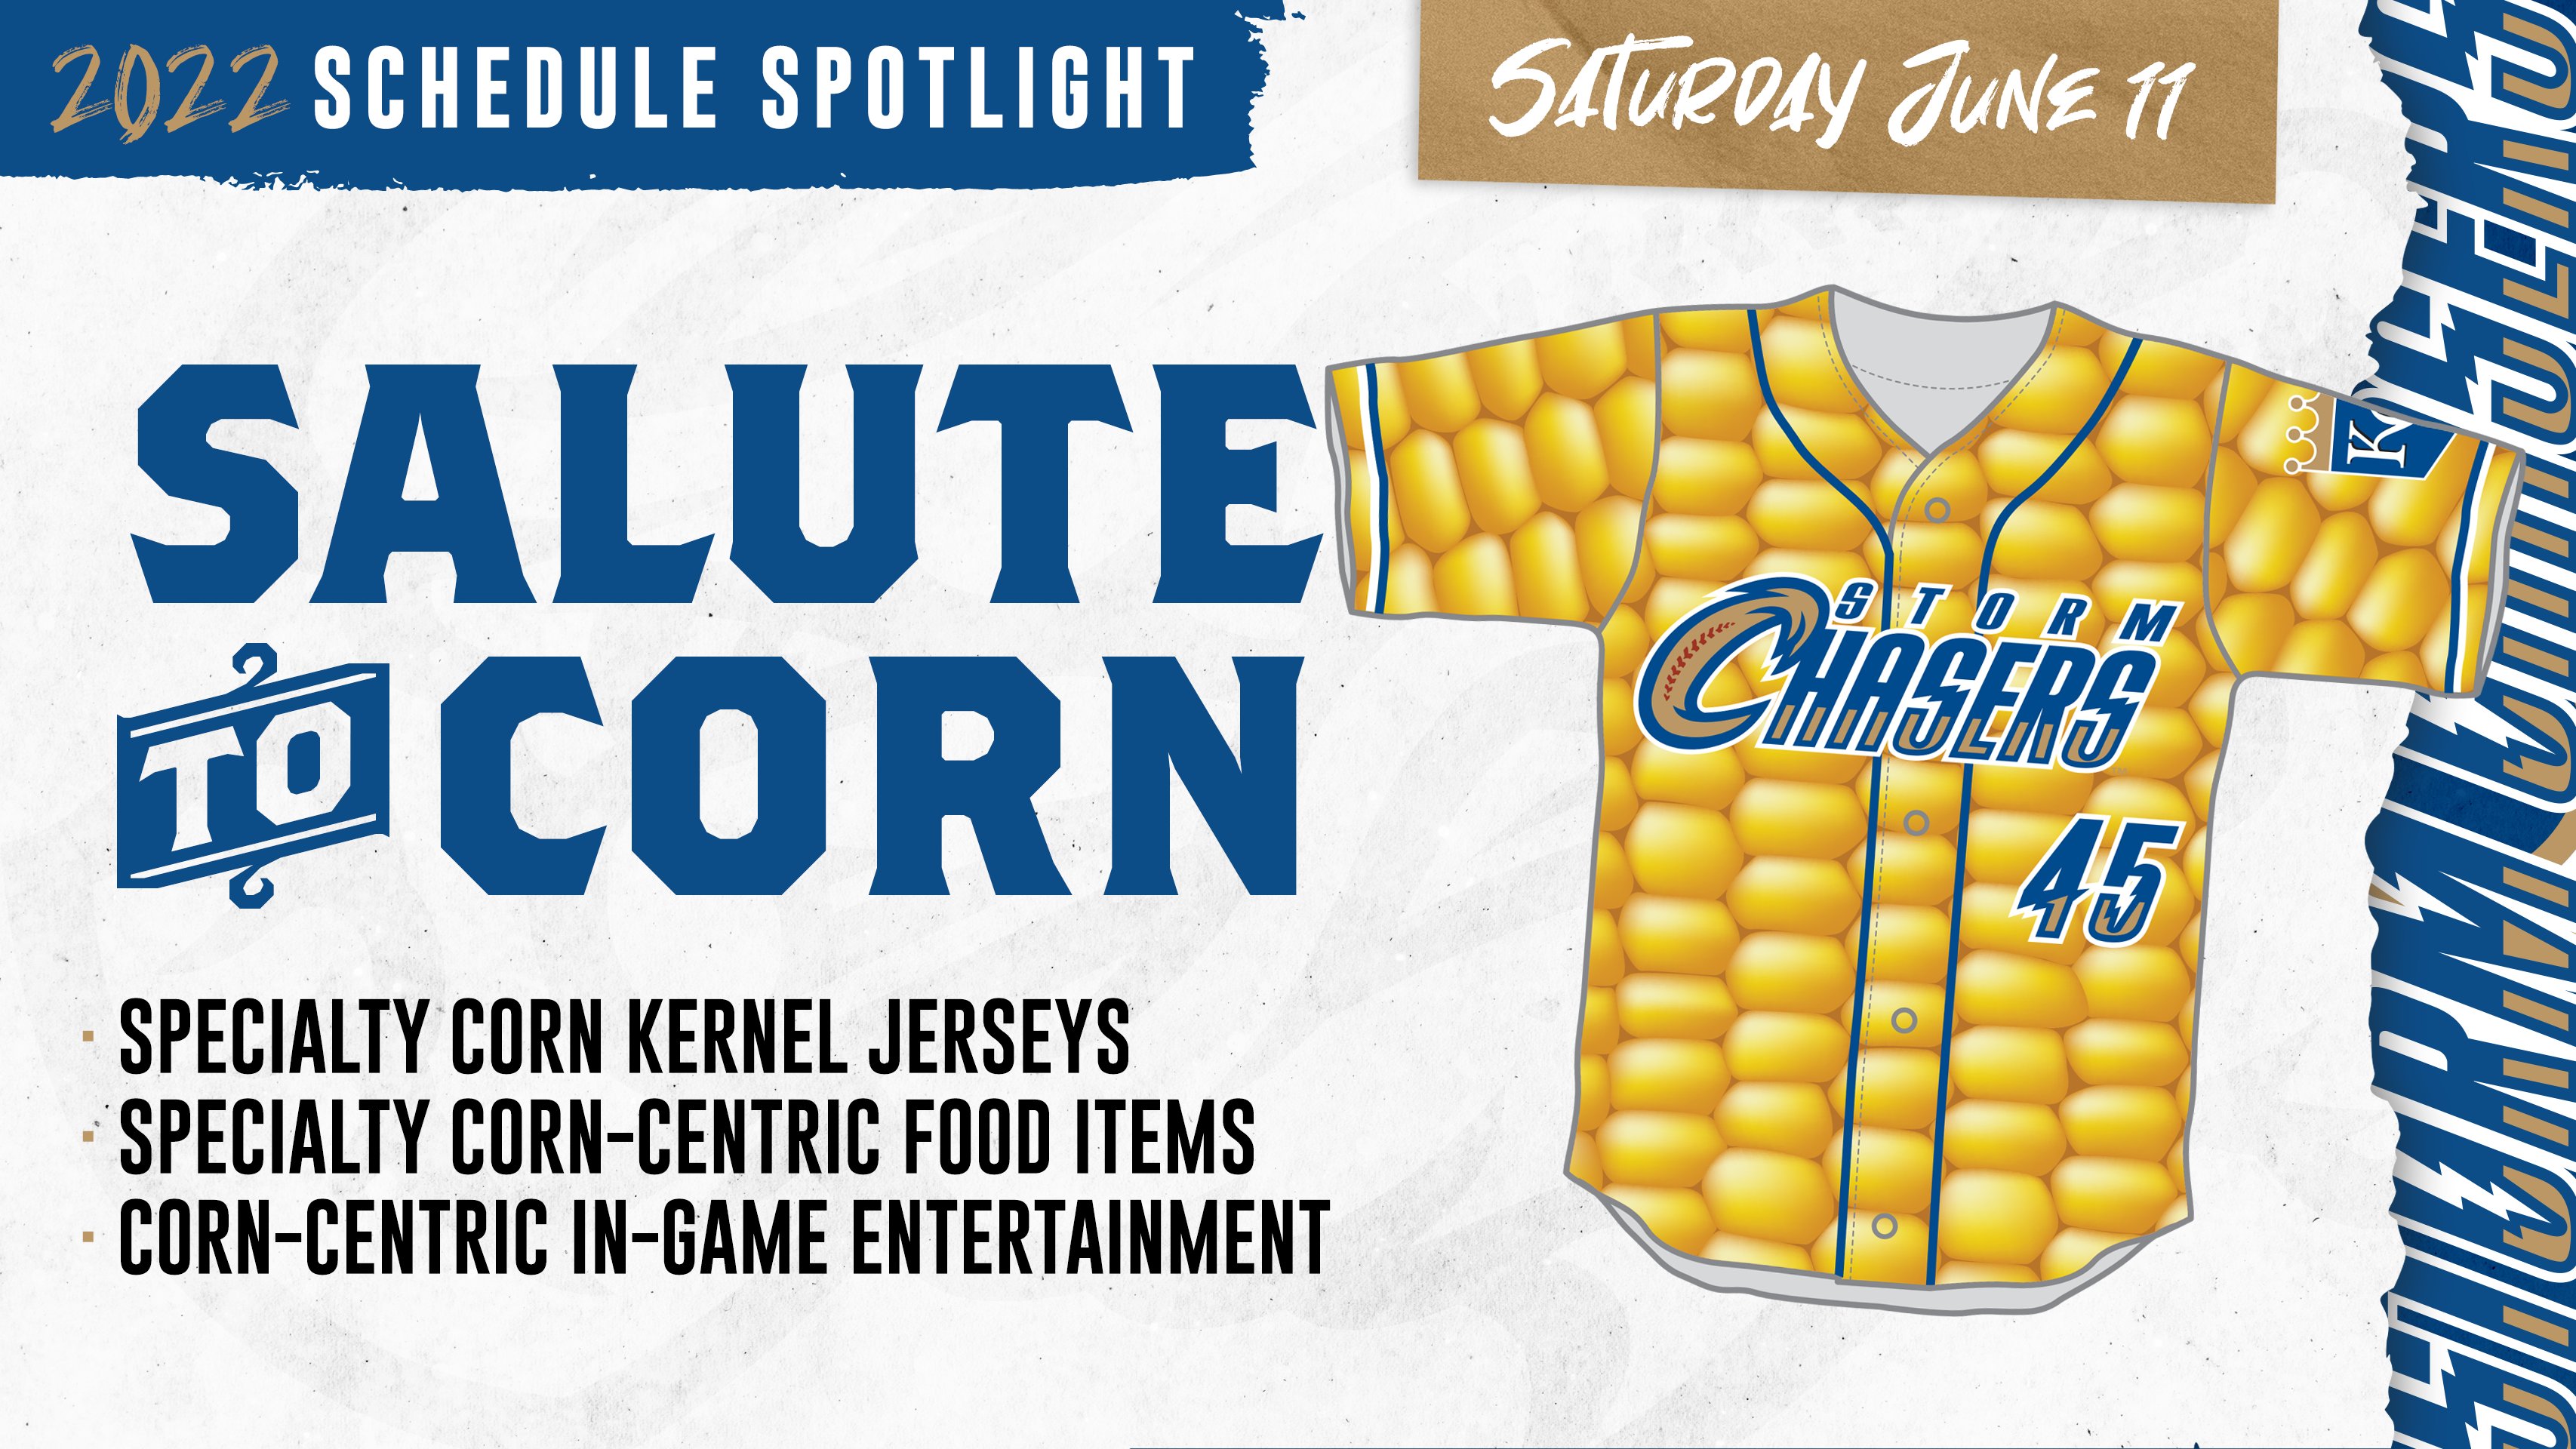 Omaha Storm Chasers on X: Corn is taking over Werner Park! June 11th is  our Salute to Corn Night! It's going to include corny things like: 🌽  Specialty corn kernel jerseys 🌽